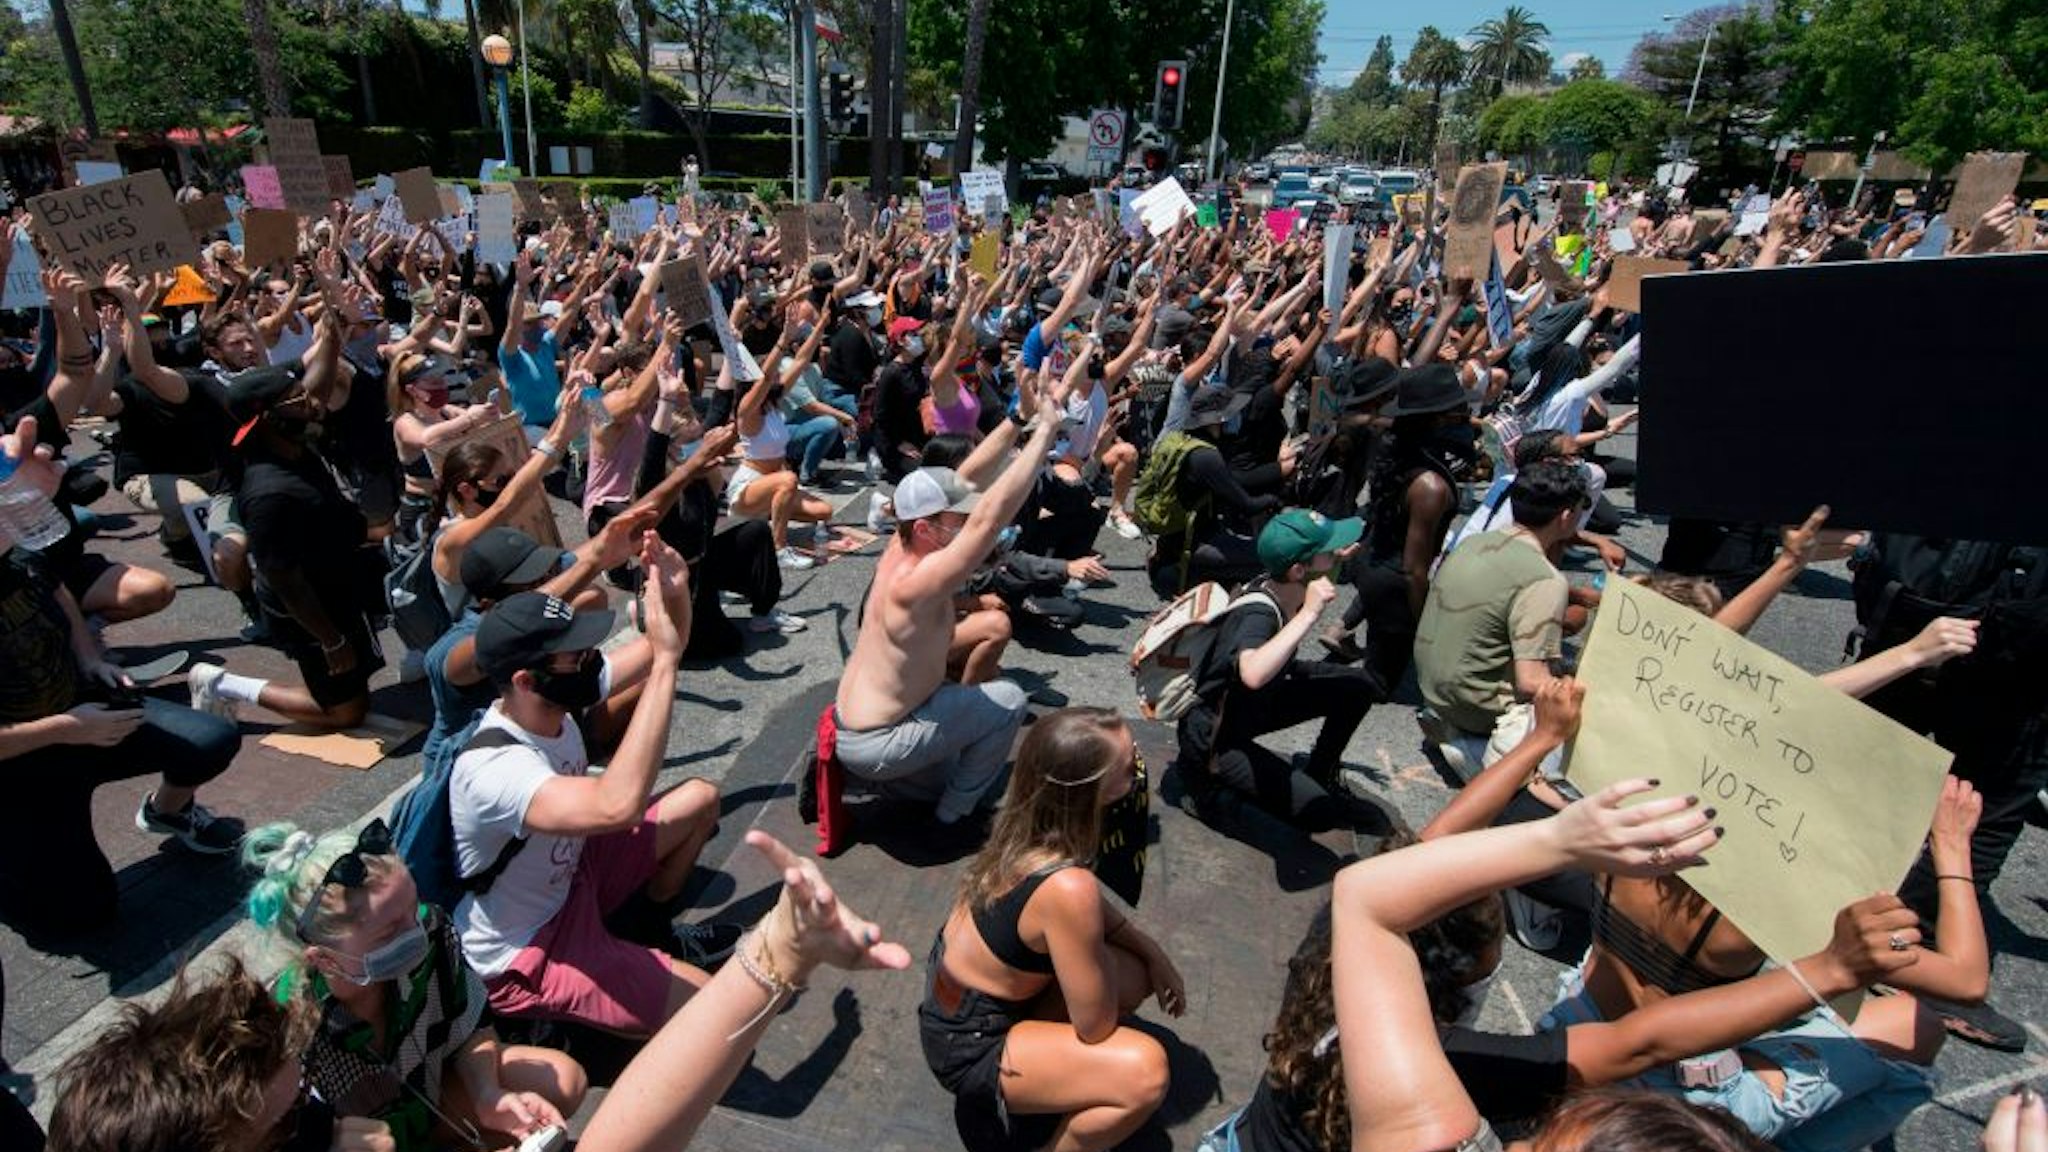 Demonstrators take a knee and put their hands up in front of officers from the Sheriff's Department as they protest the death of George Floyd, in West Hollywood, California on June 3, 2020.